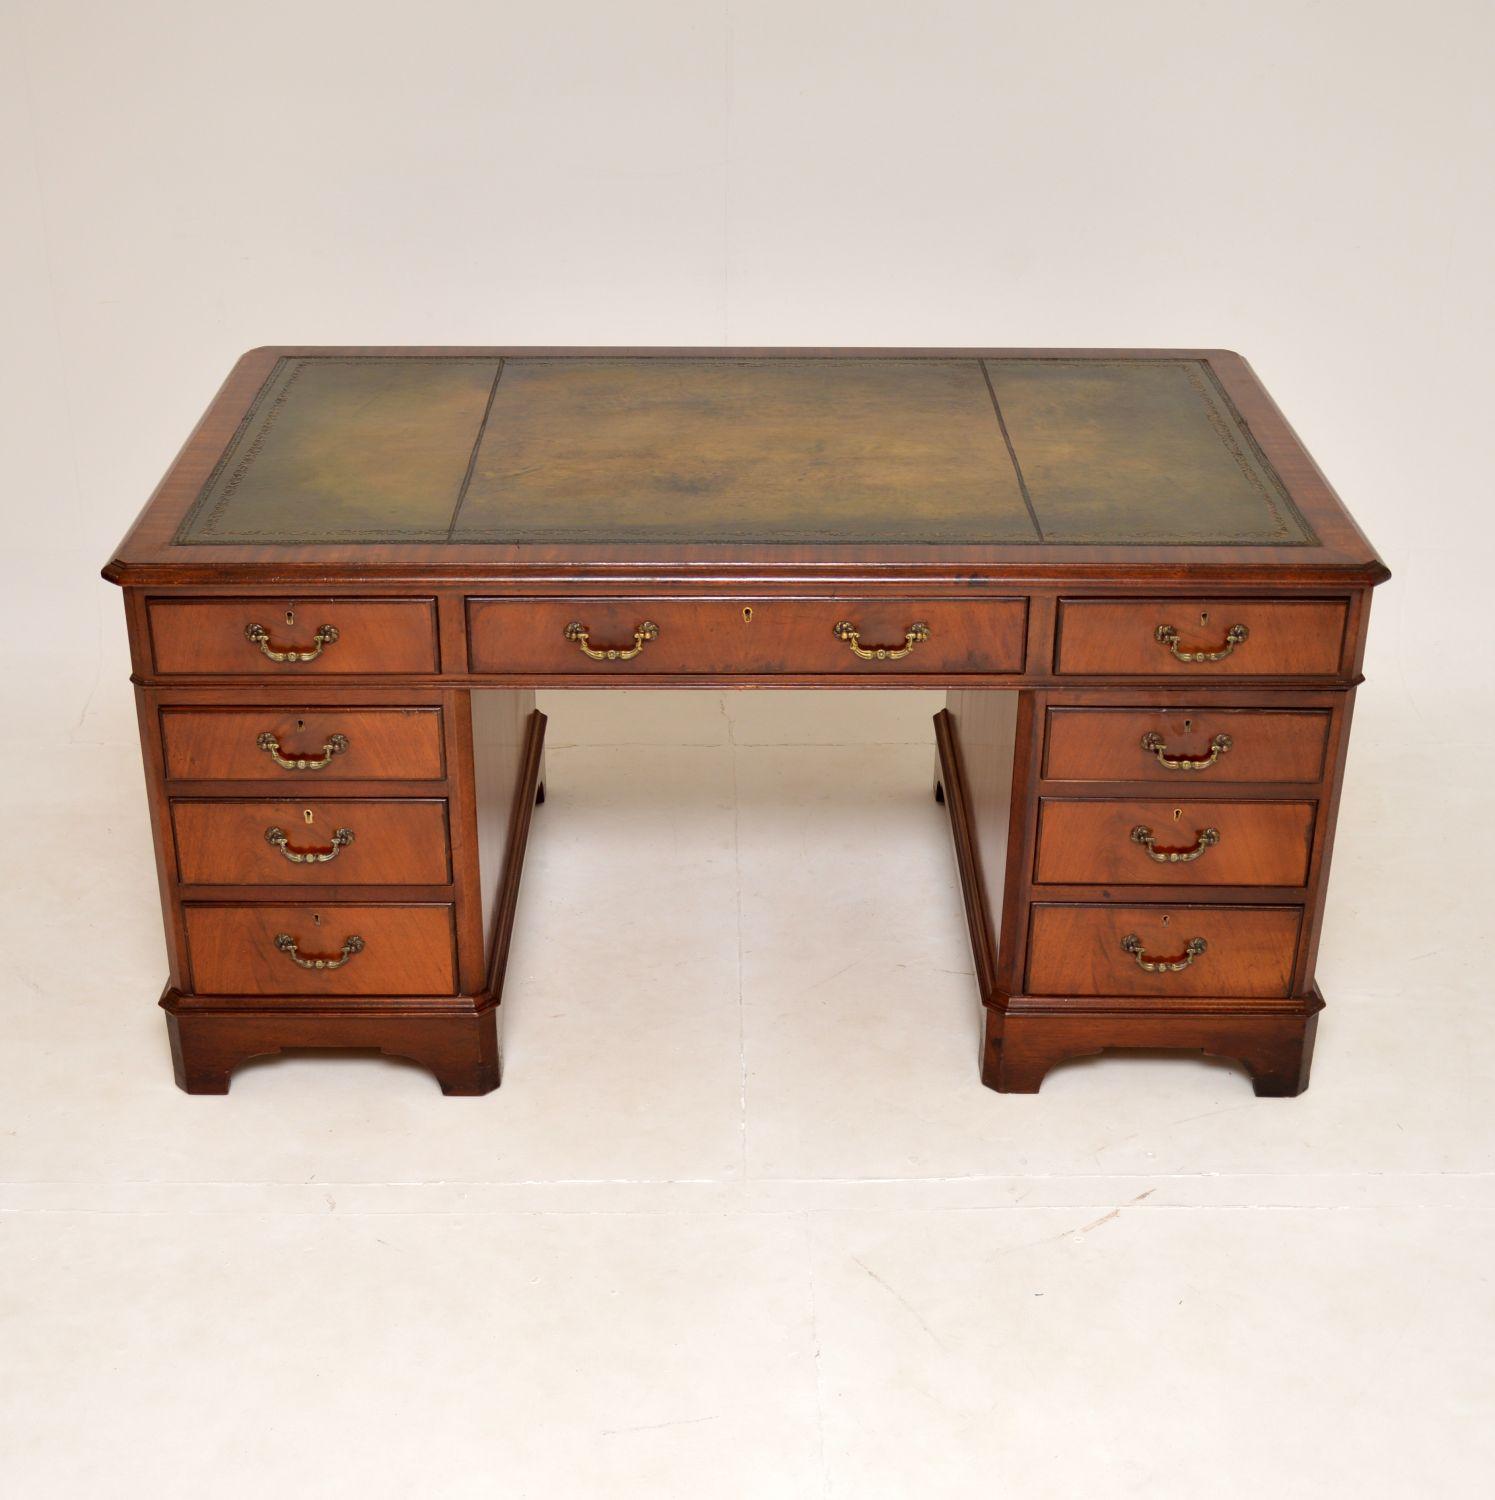 A large and impressive antique pedestal desk in the Georgian style. This was made in England, it dates from around the 1950’s.

It is of excellent quality, with a beautiful inset green leather top that has been hand coloured and gold tooled. The